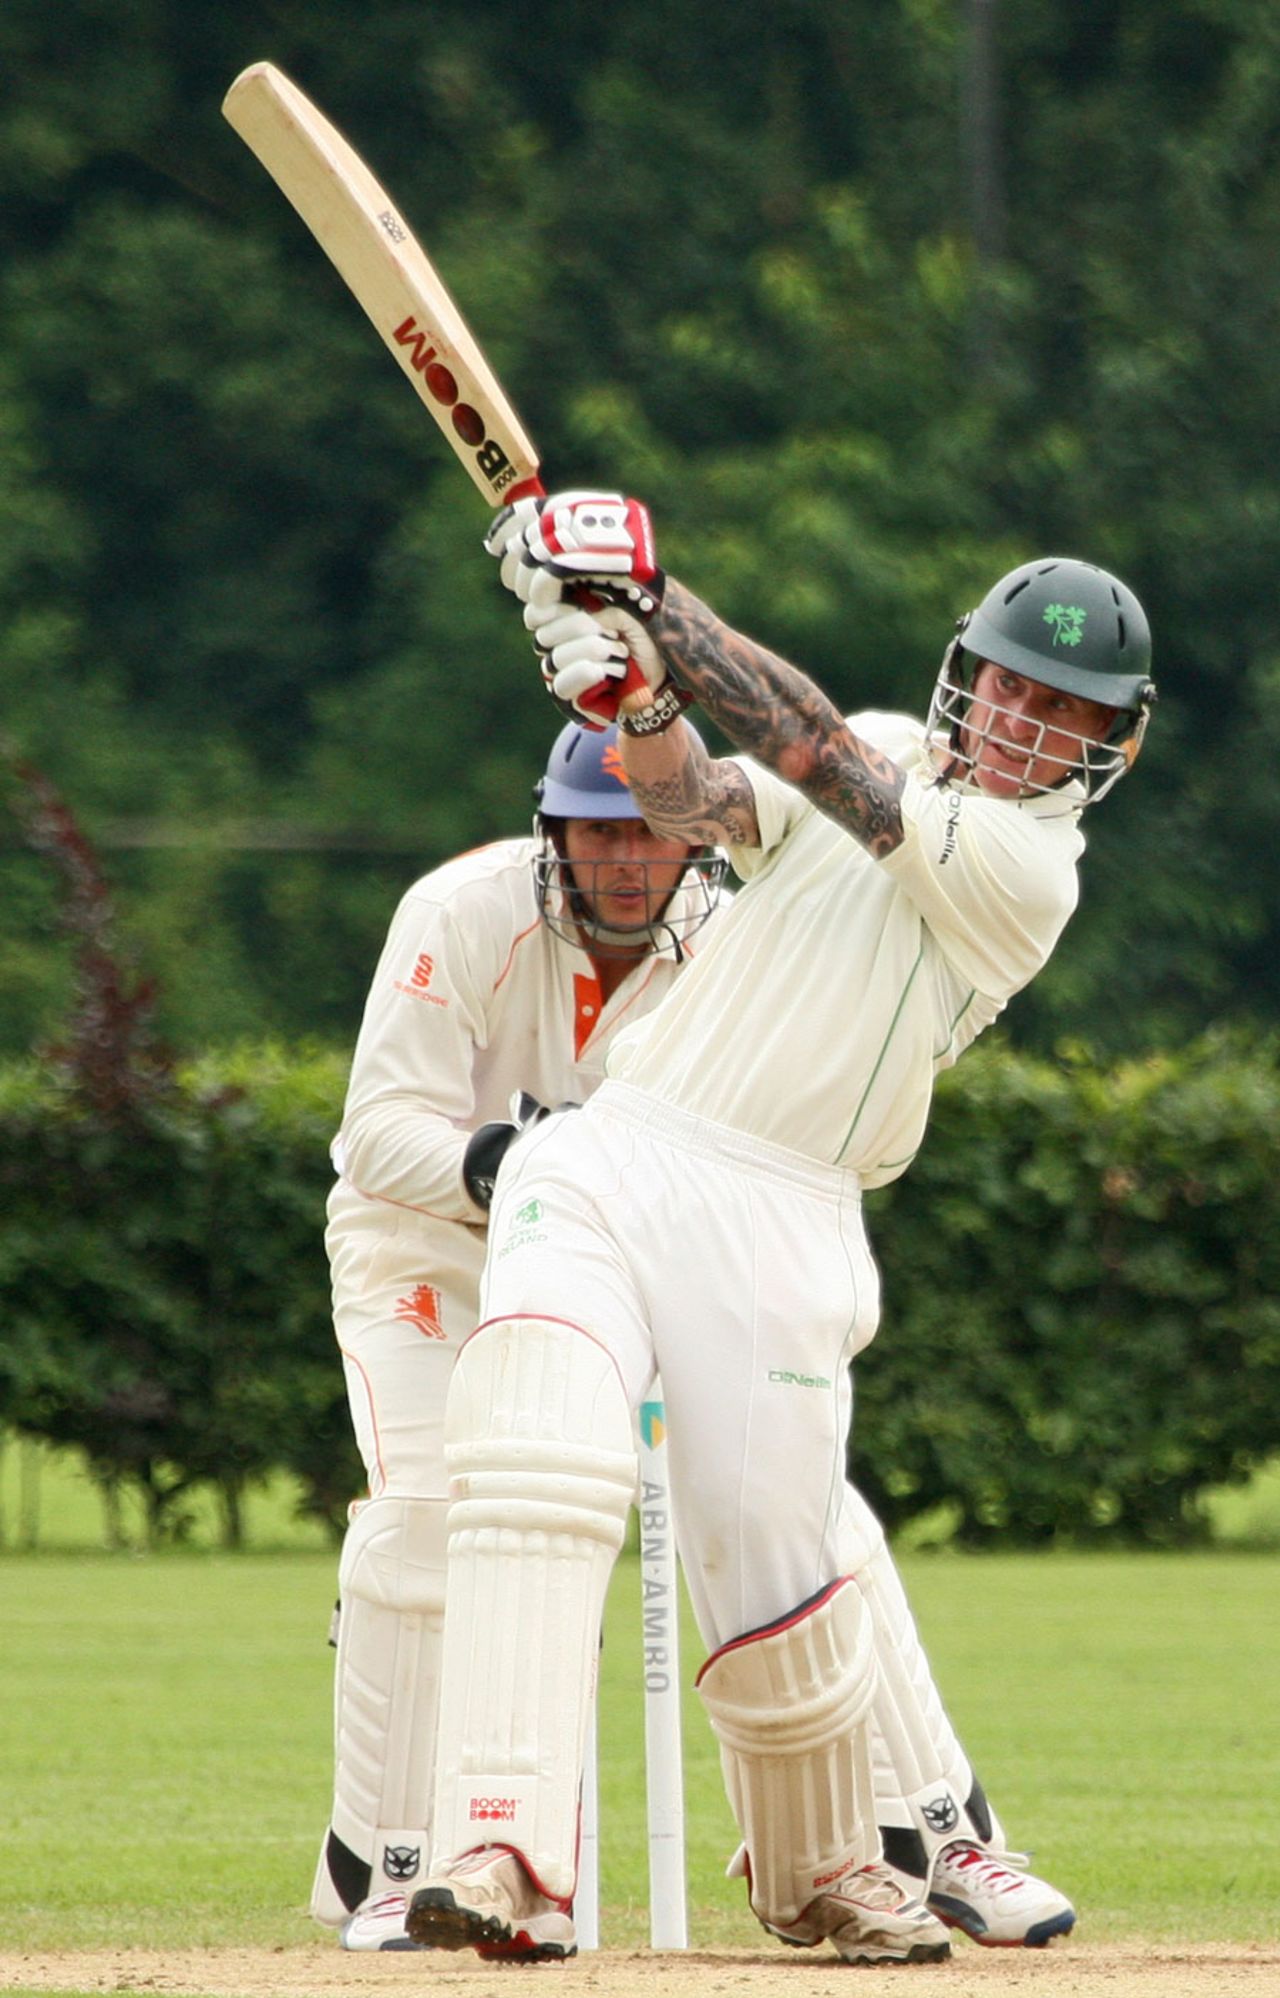 John Mooney plays over midwicket, Netherlands v Ireland, ICC Intercontinental Cup, 3rd day, Deventer, July 3, 2013